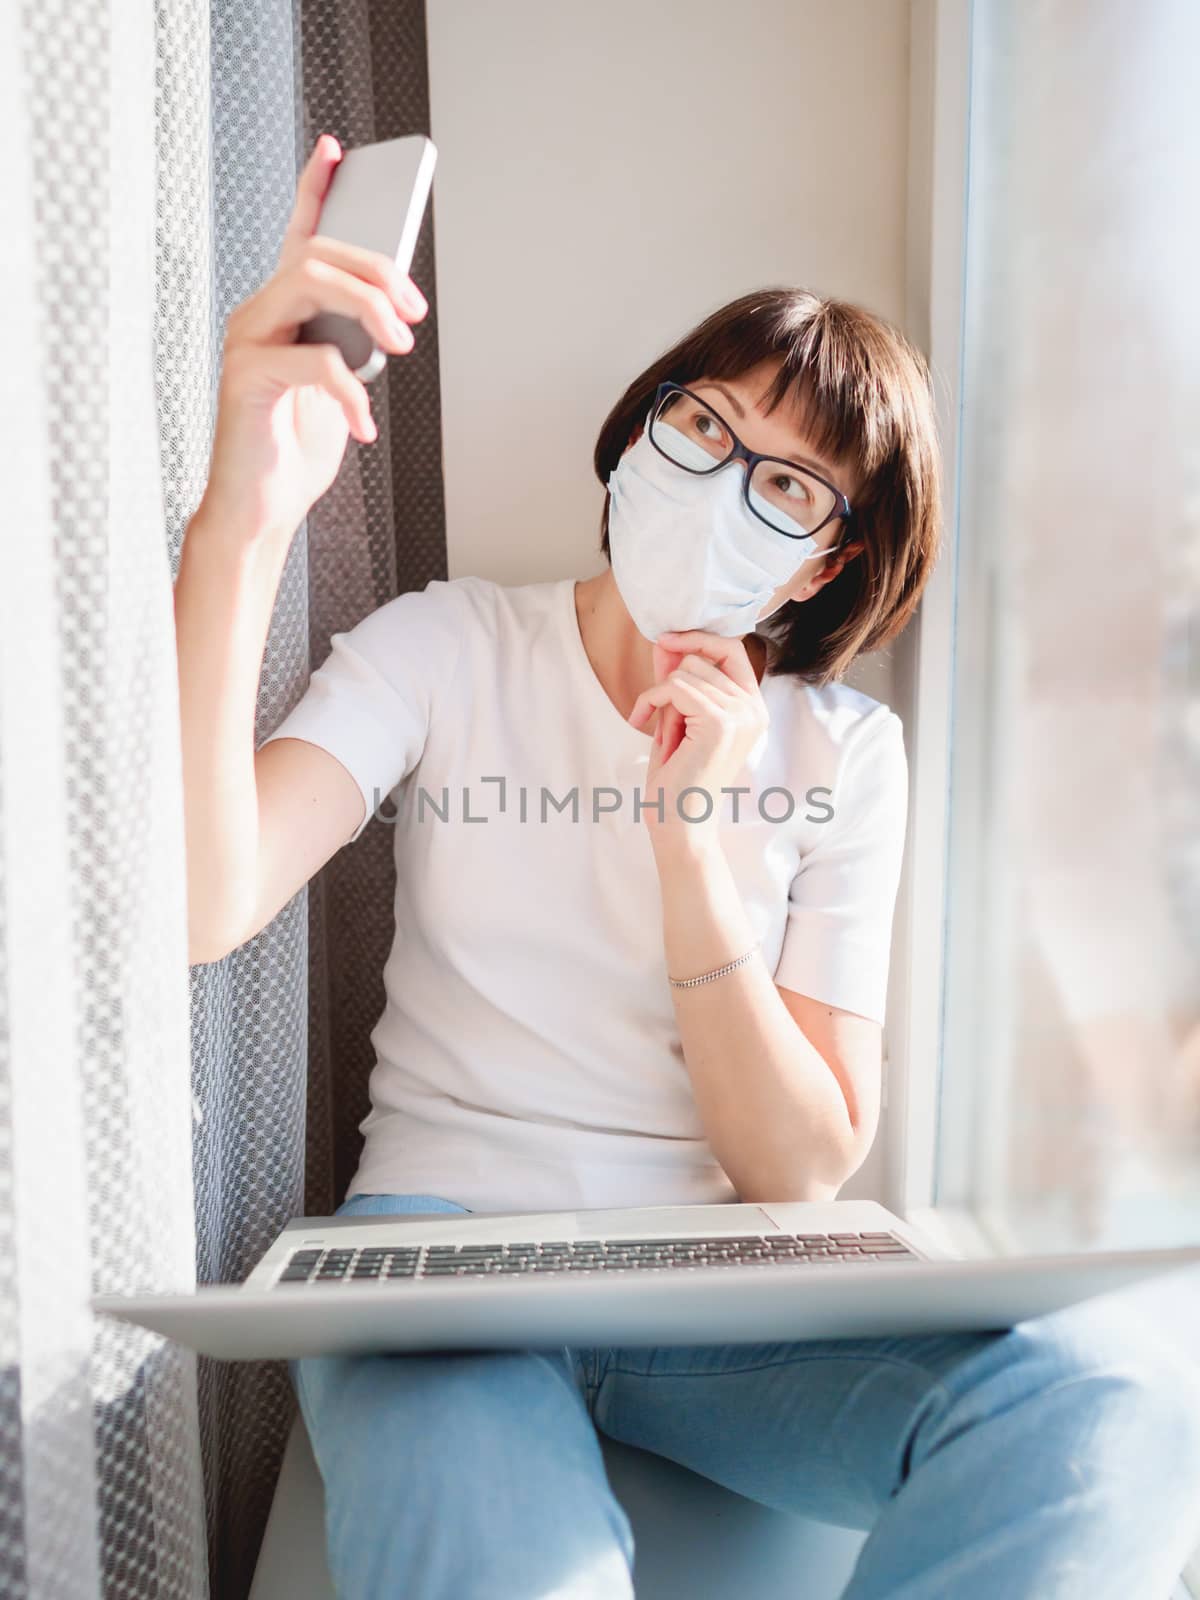 Pretty woman in medical mask works remotely from home. She is making selfie on window sill with laptop on knees. Lockdown quarantine because of coronavirus COVID19. Self isolation at home.